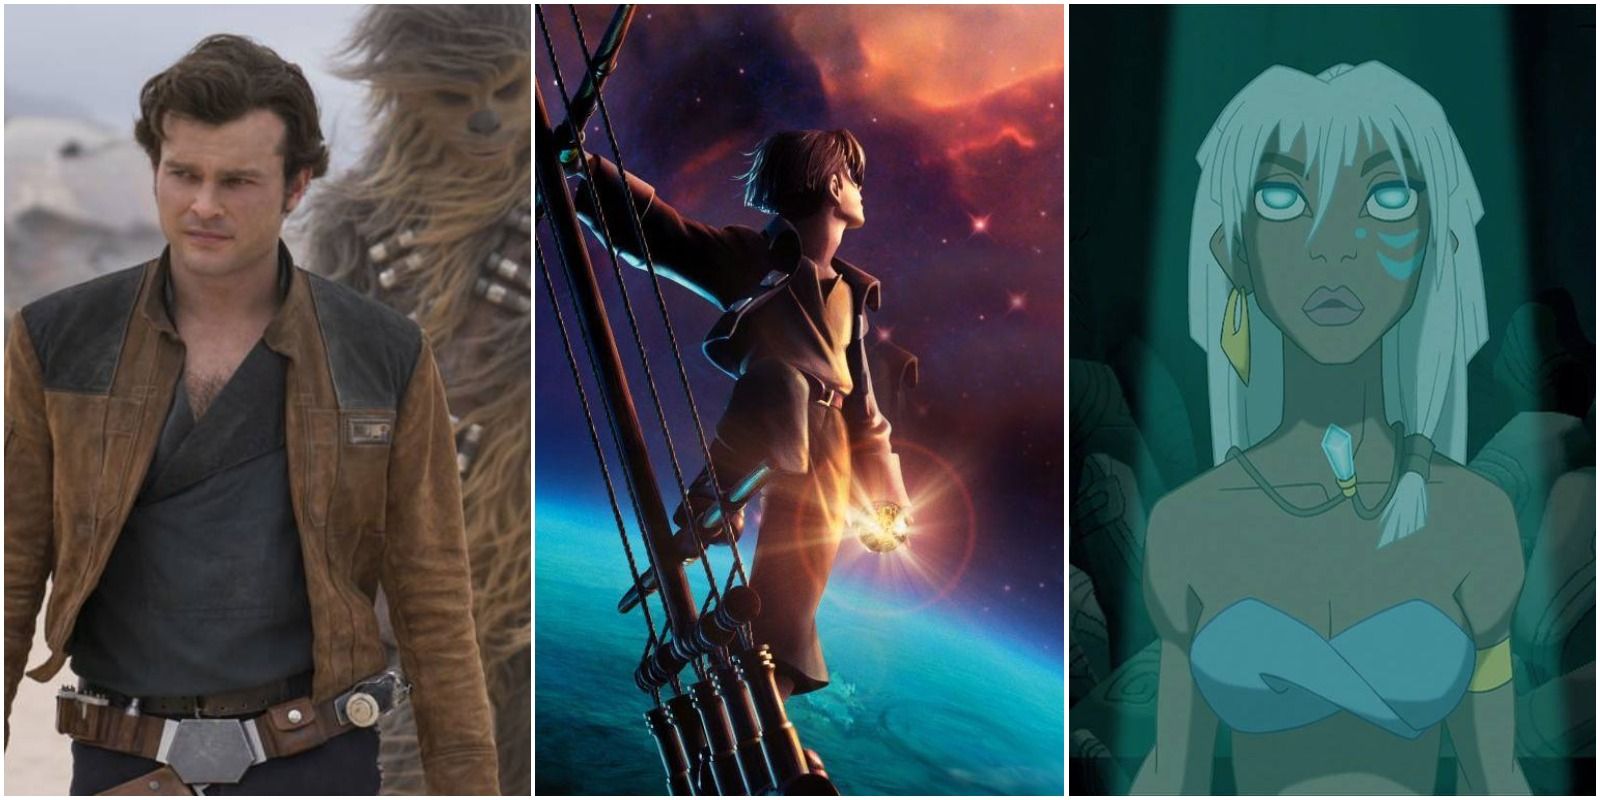 Disney: Treasure Planet & 8 Other Movie Flops That Deserve More Attention